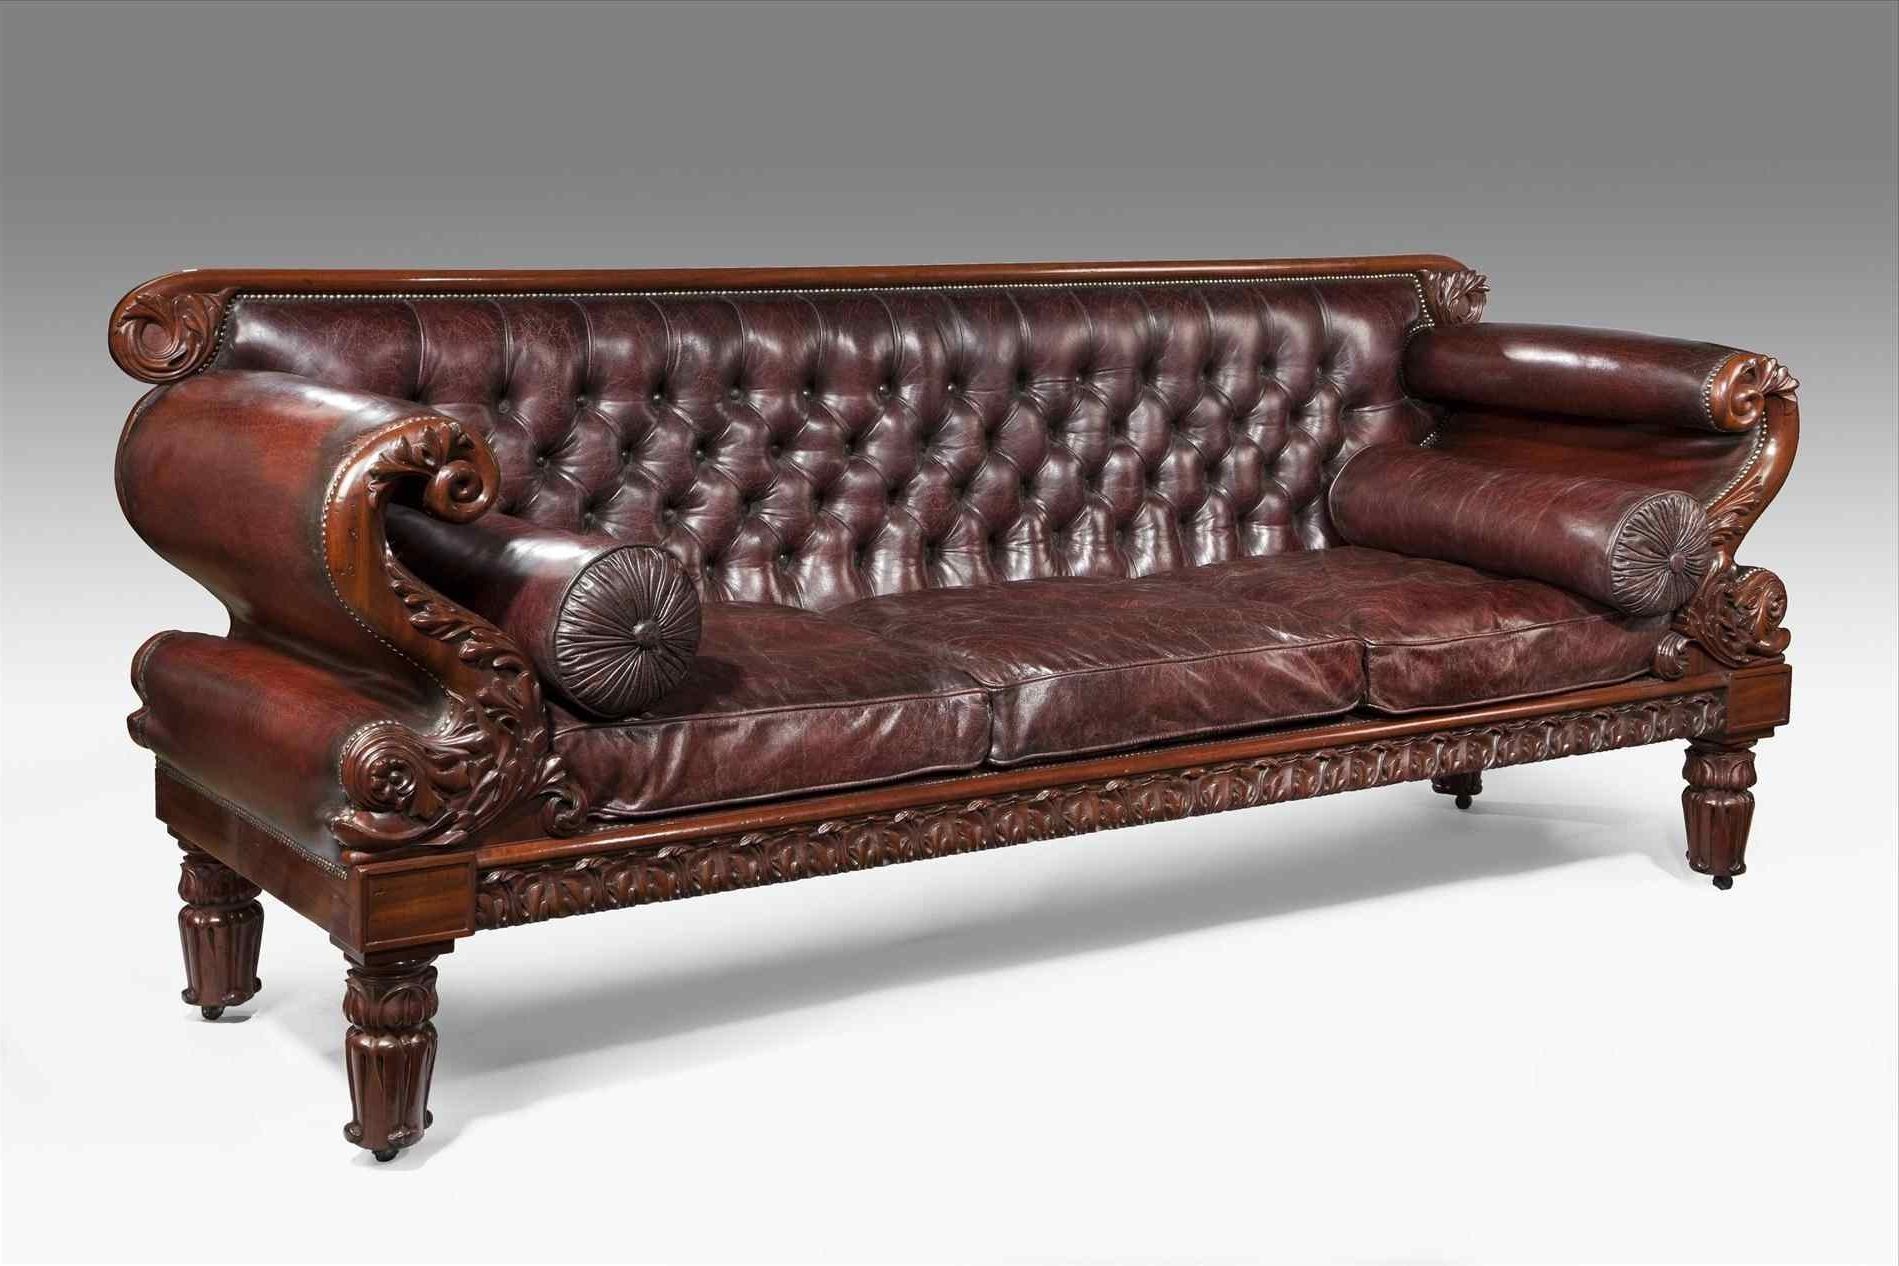 Antique Sofas Inside Popular Sofa : Modern Antique Sofa Vintage High Back Armchair Chairs Ideas (View 7 of 15)